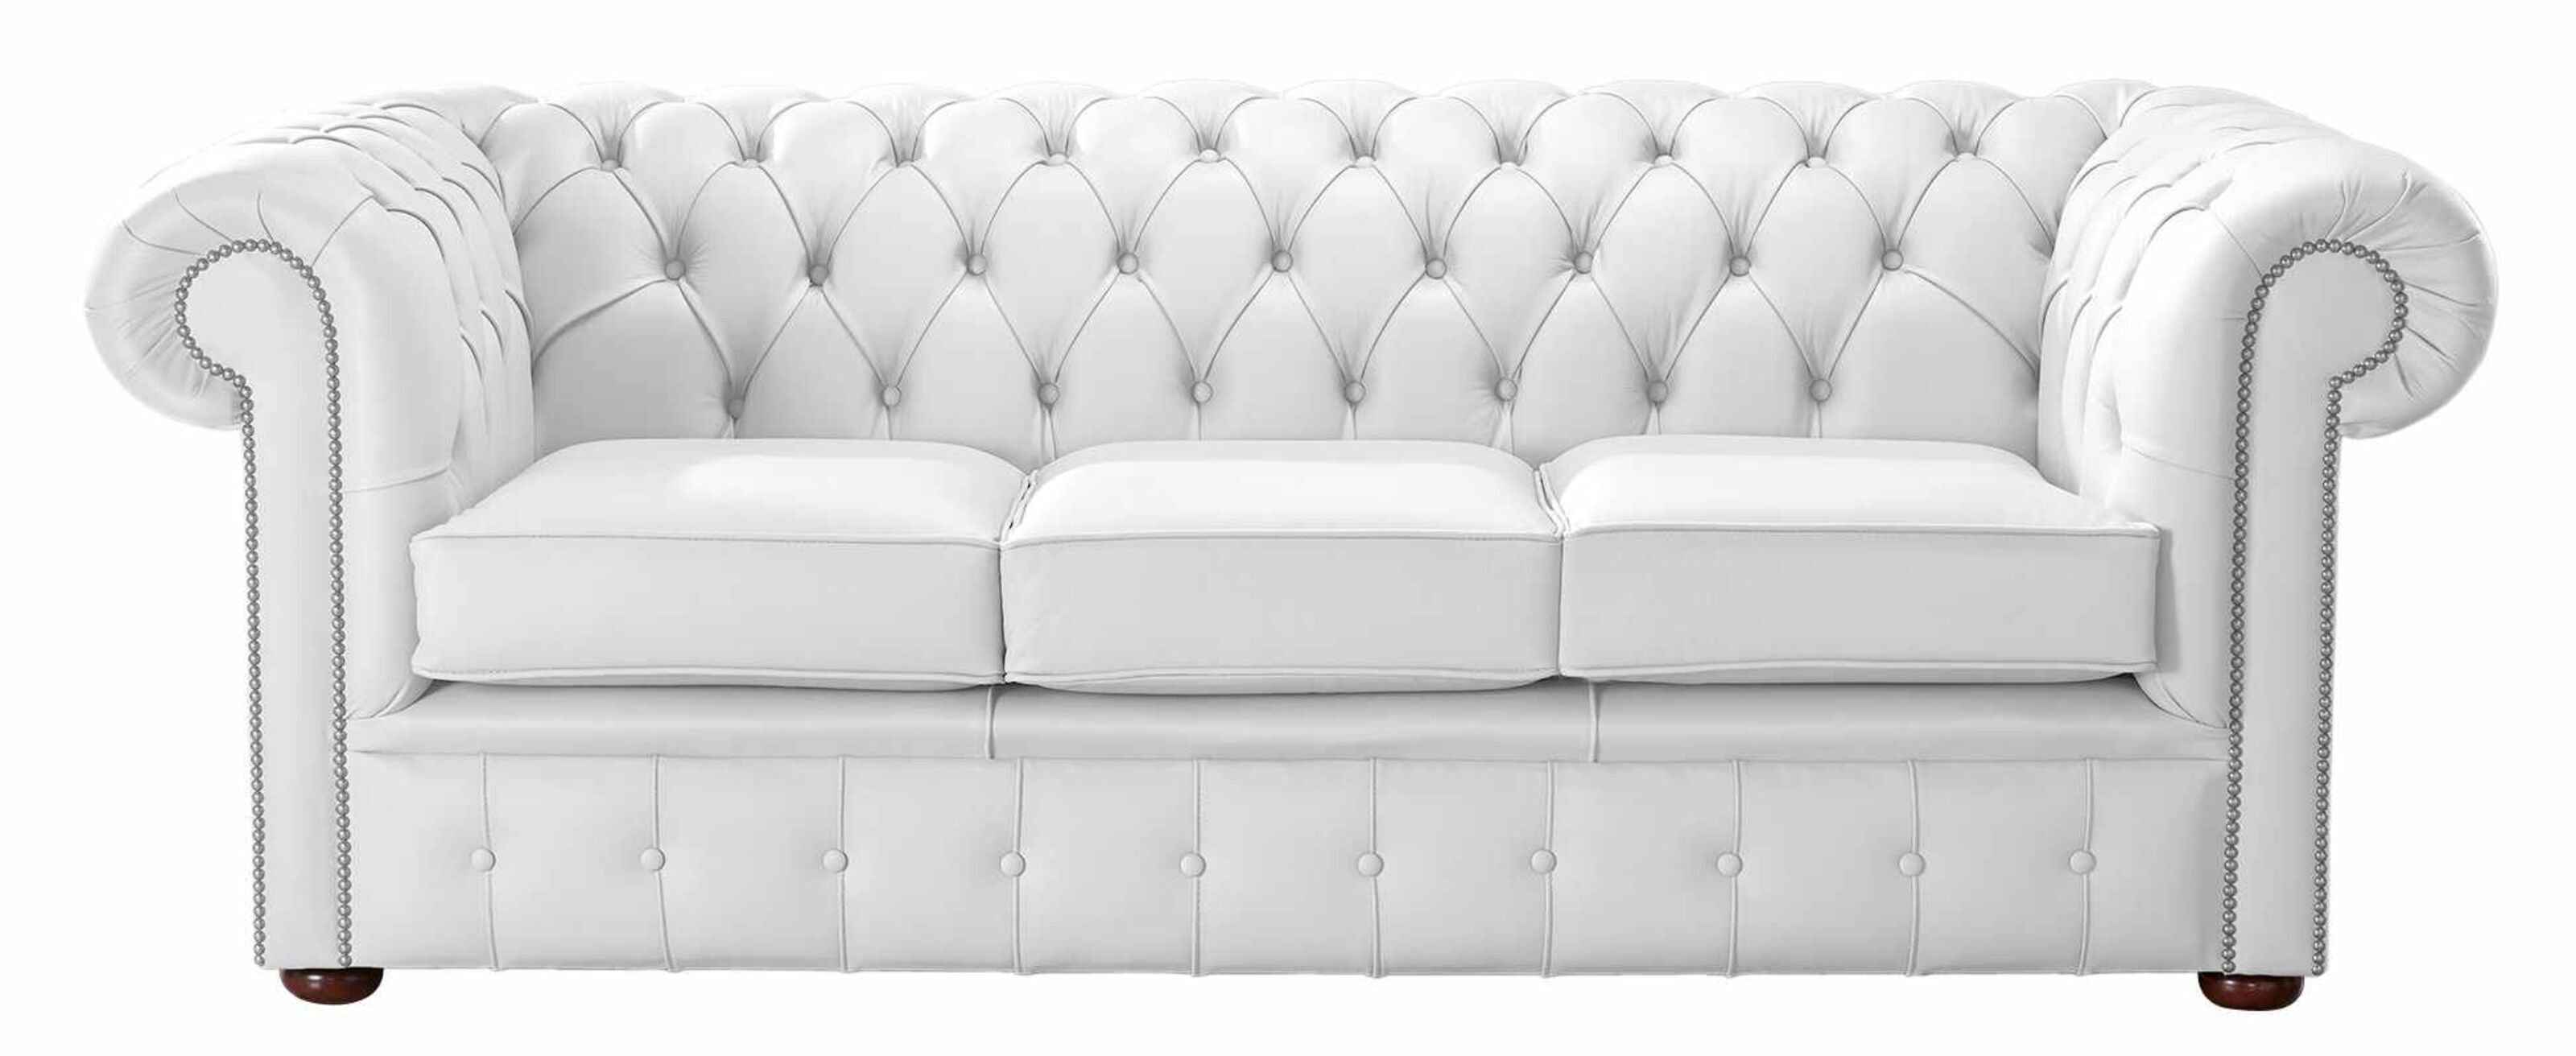 Exploring the World of Chesterfield Sofas Options and Offerings  %Post Title